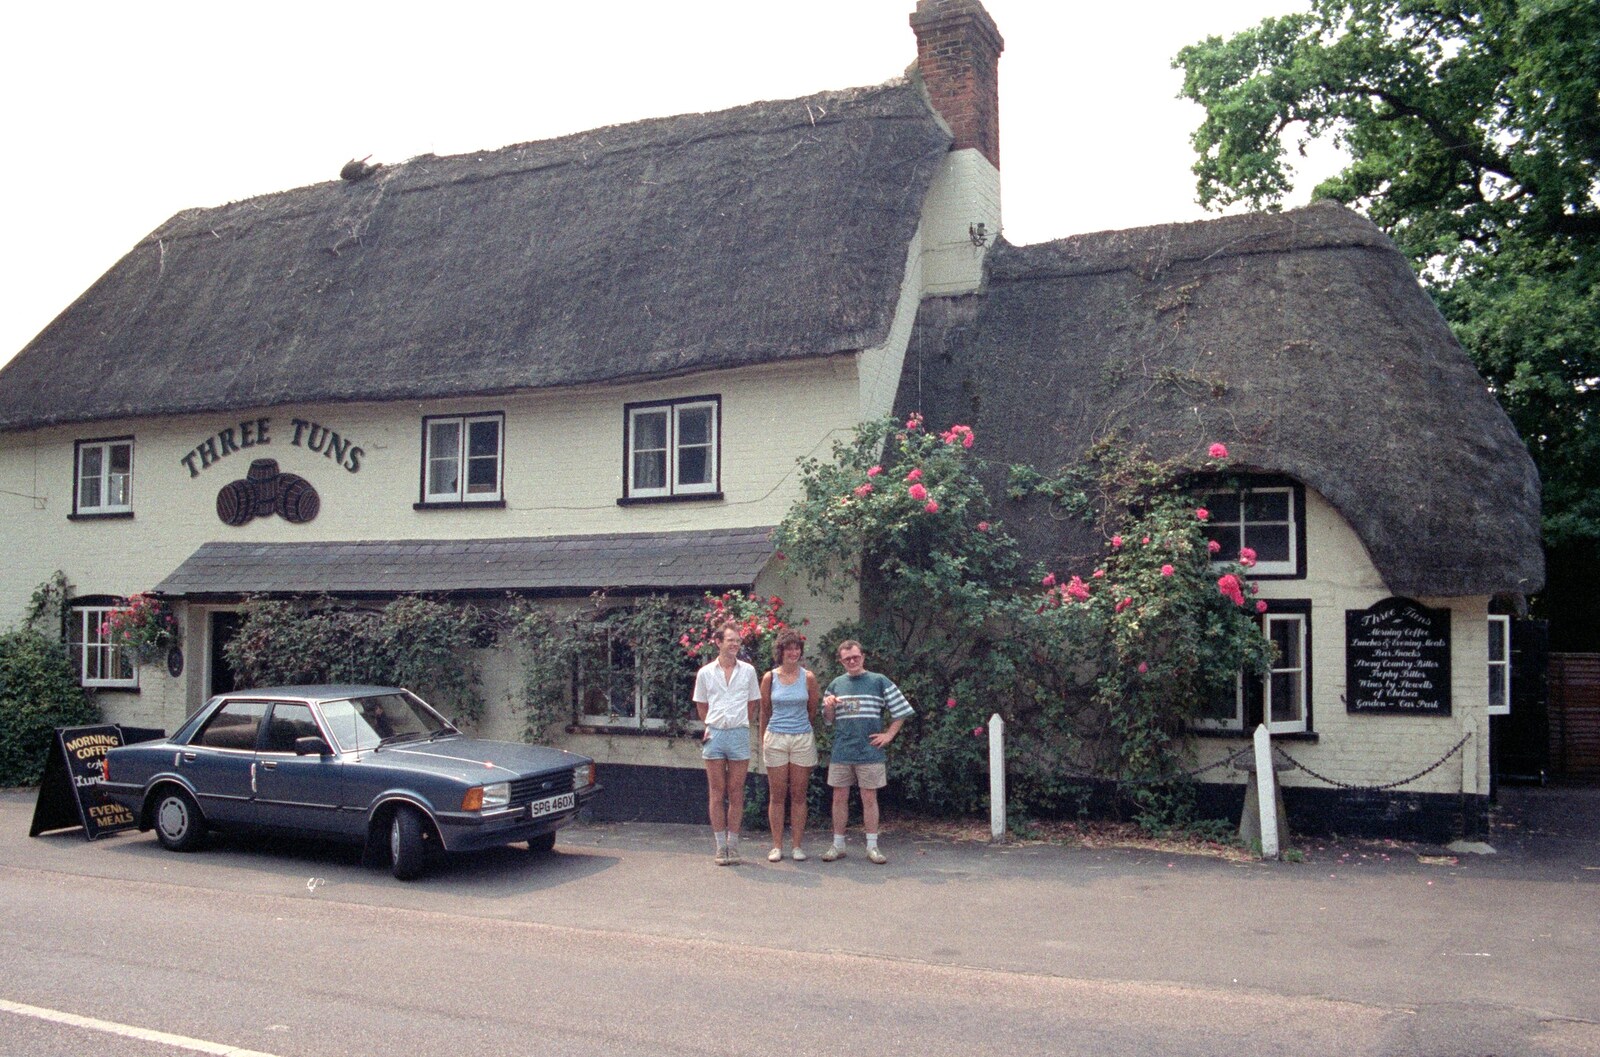 The Three Tuns pub in Bransgore from Back From Uni: Summer Pruning, Bransgore, Dorset - 25th July 1989